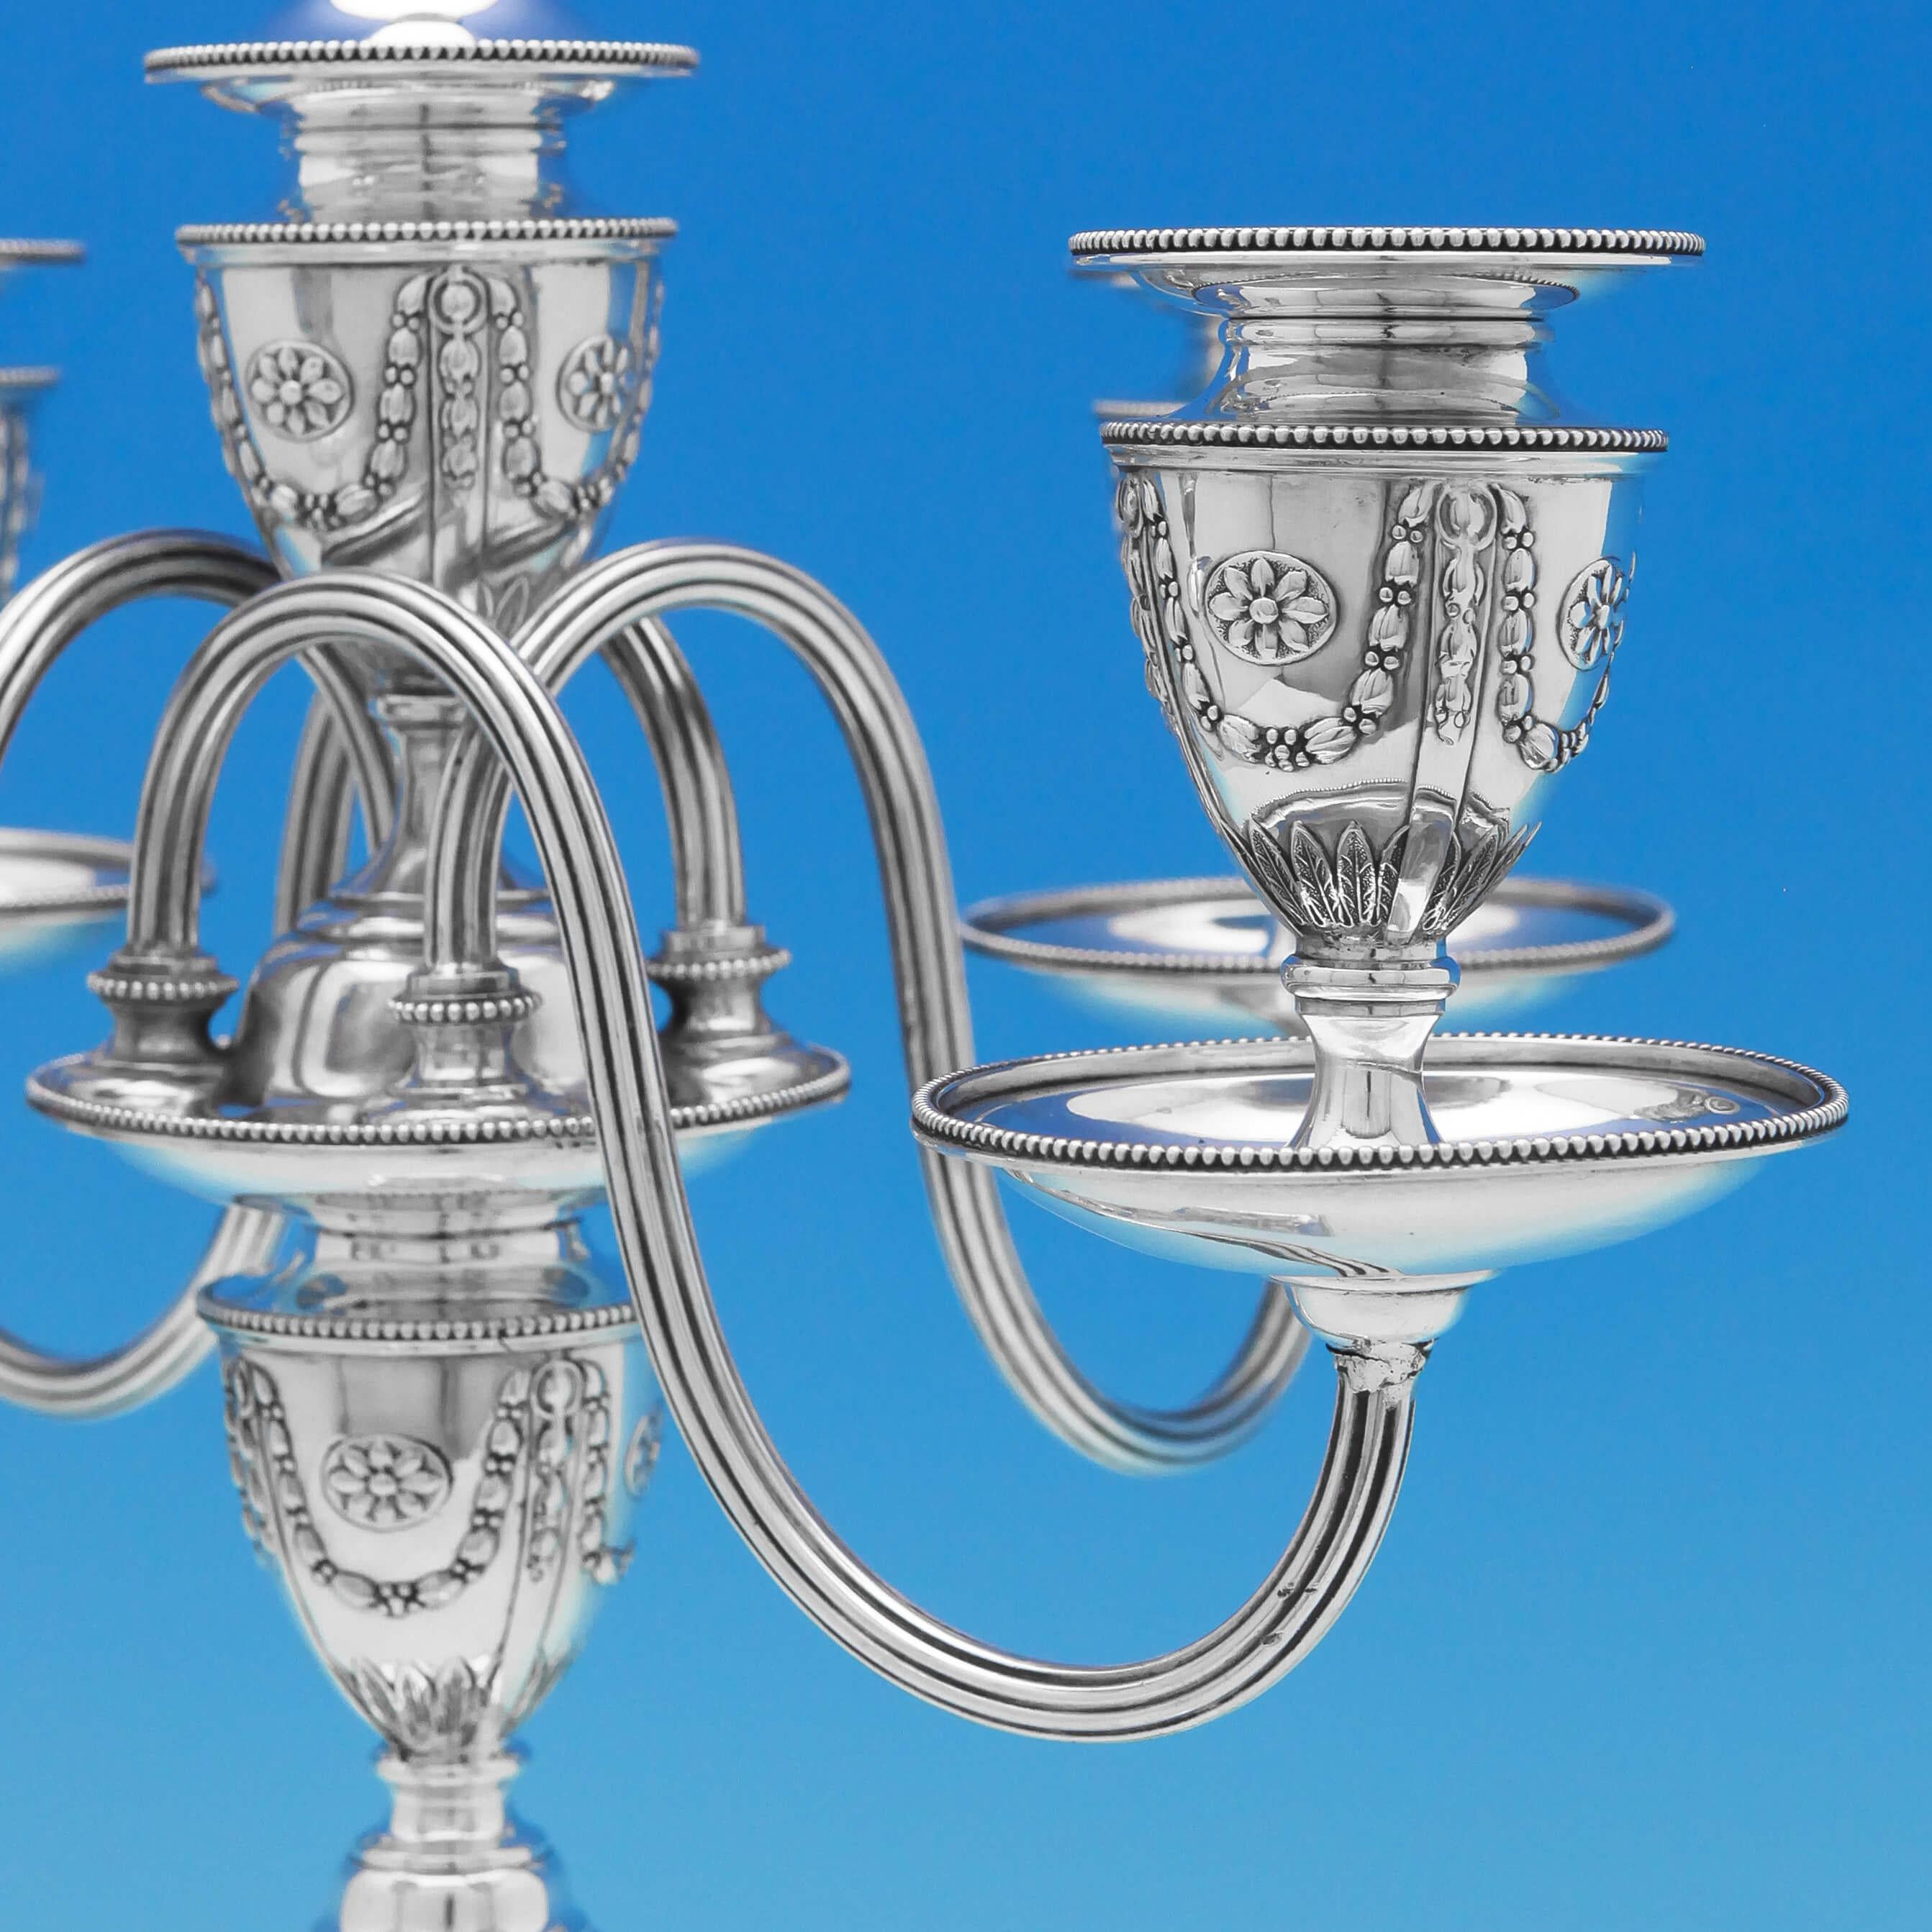 Hallmarked in London in 1890/1 by Elkington & Co., this spectacular pair of 5 light, Antique, Victorian, sterling silver candelabra are in the Adams Style, decorated with rams’ heads, swags and bows throughout. The branches are removable to allow